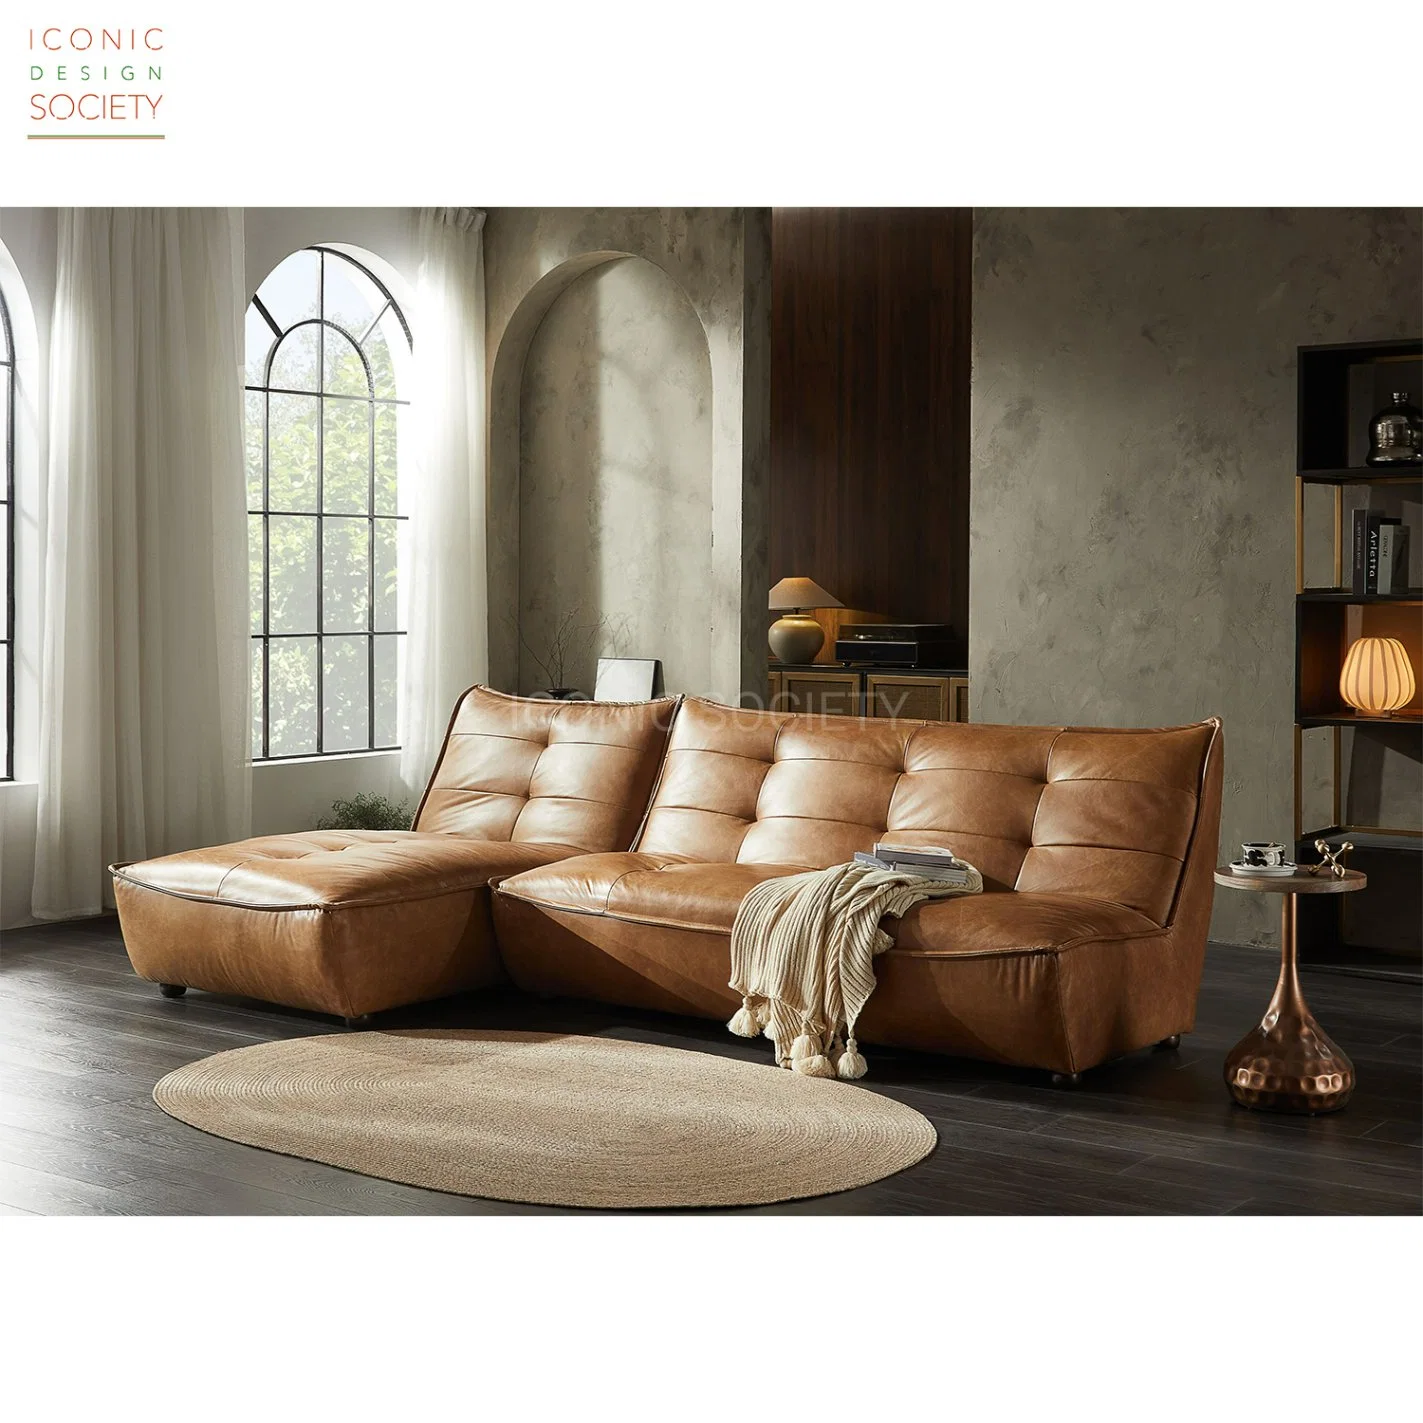 Modern Custom Classic Couch Sectional Set Lounge Leisure Sofa Hotel Luxury Living Room Home Furniture Genuine Leather Sofa Set